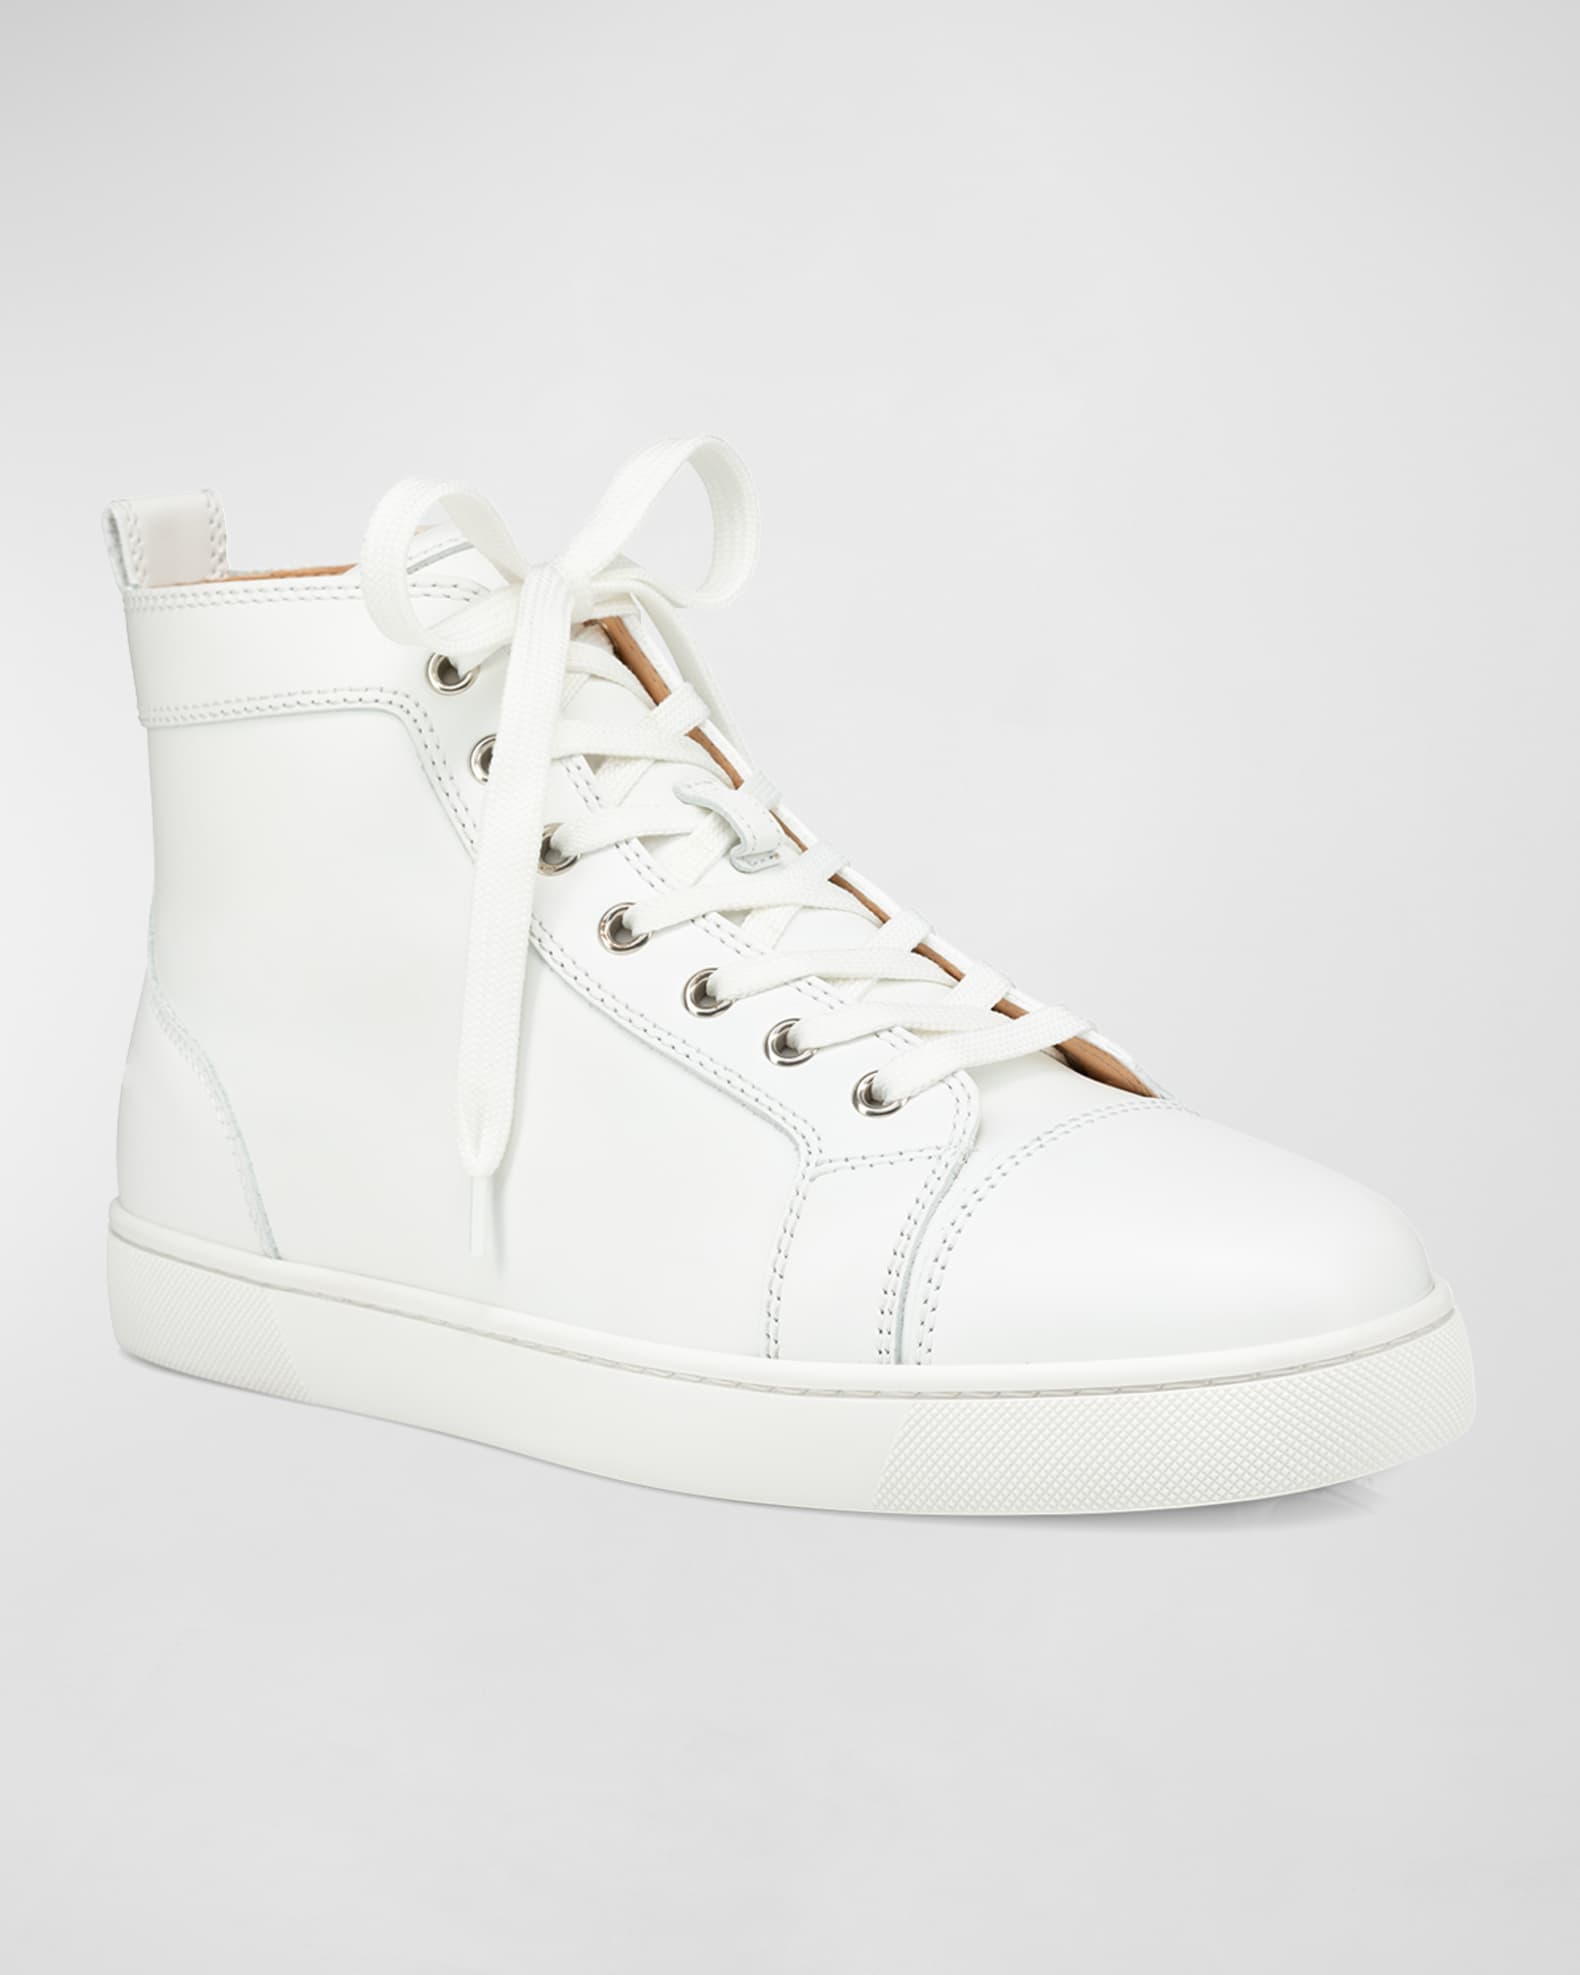 Christian Louboutin Men's Louis Leather High-Top Sneakers | Neiman Marcus